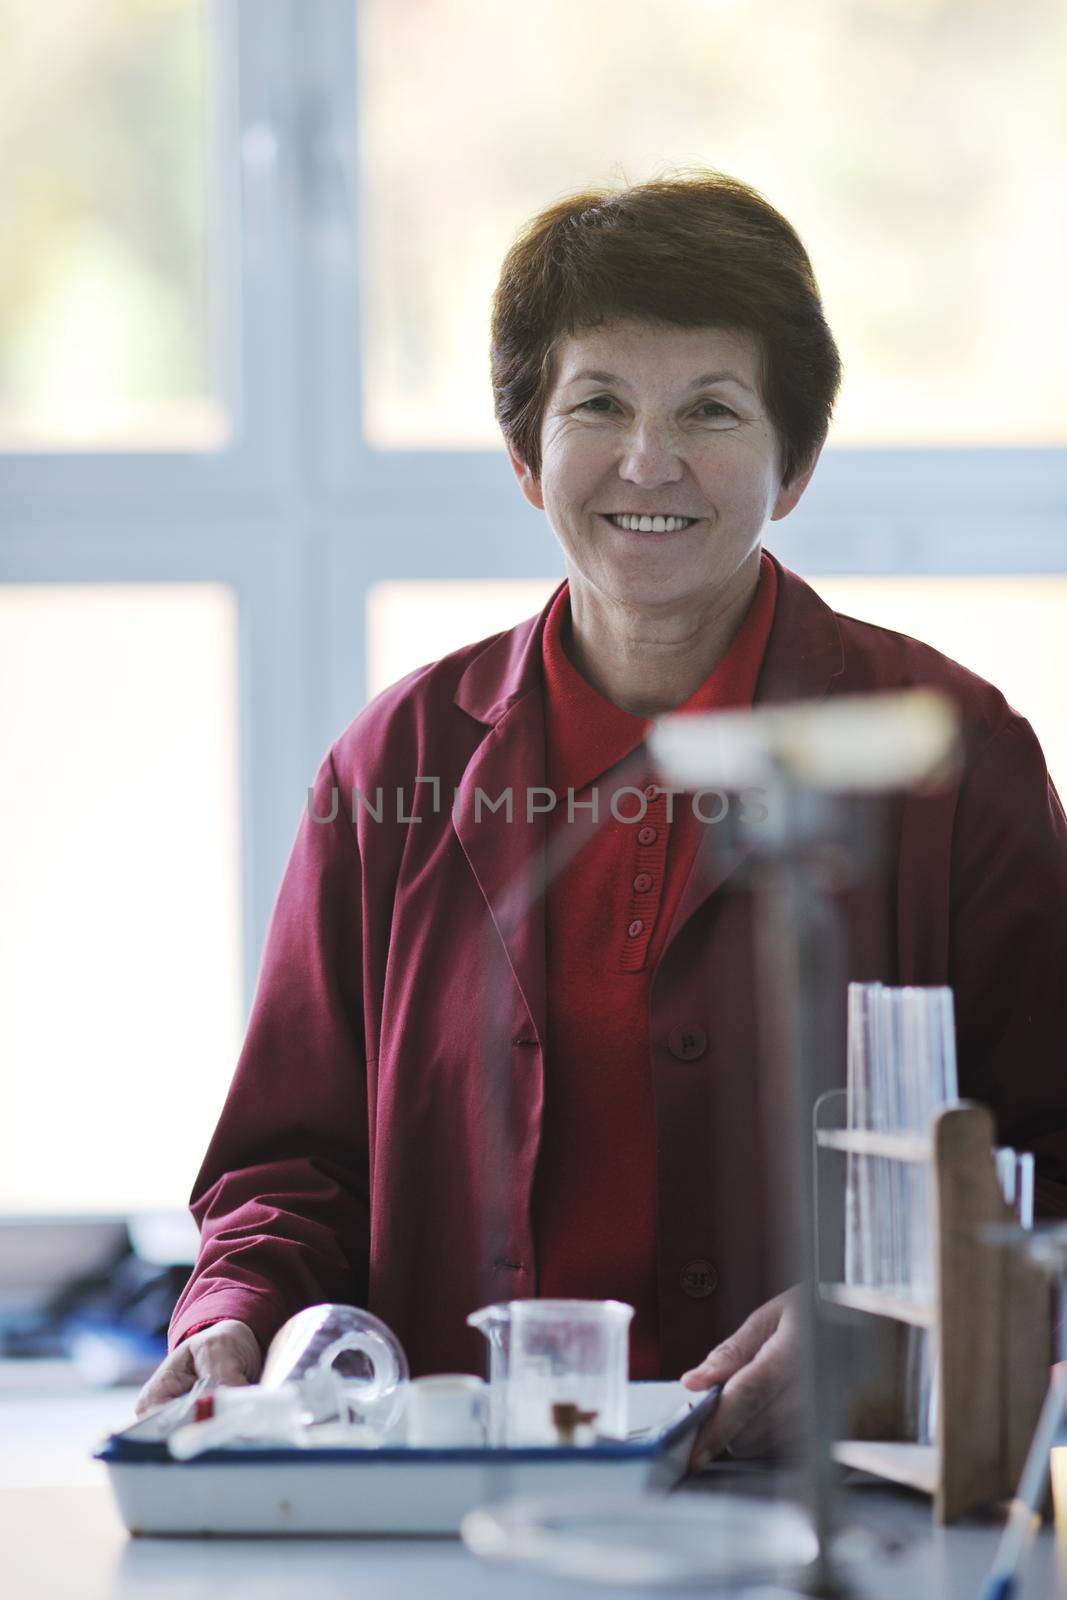 older or senior science and chemistry teacher woman portrait at classroom school indoor